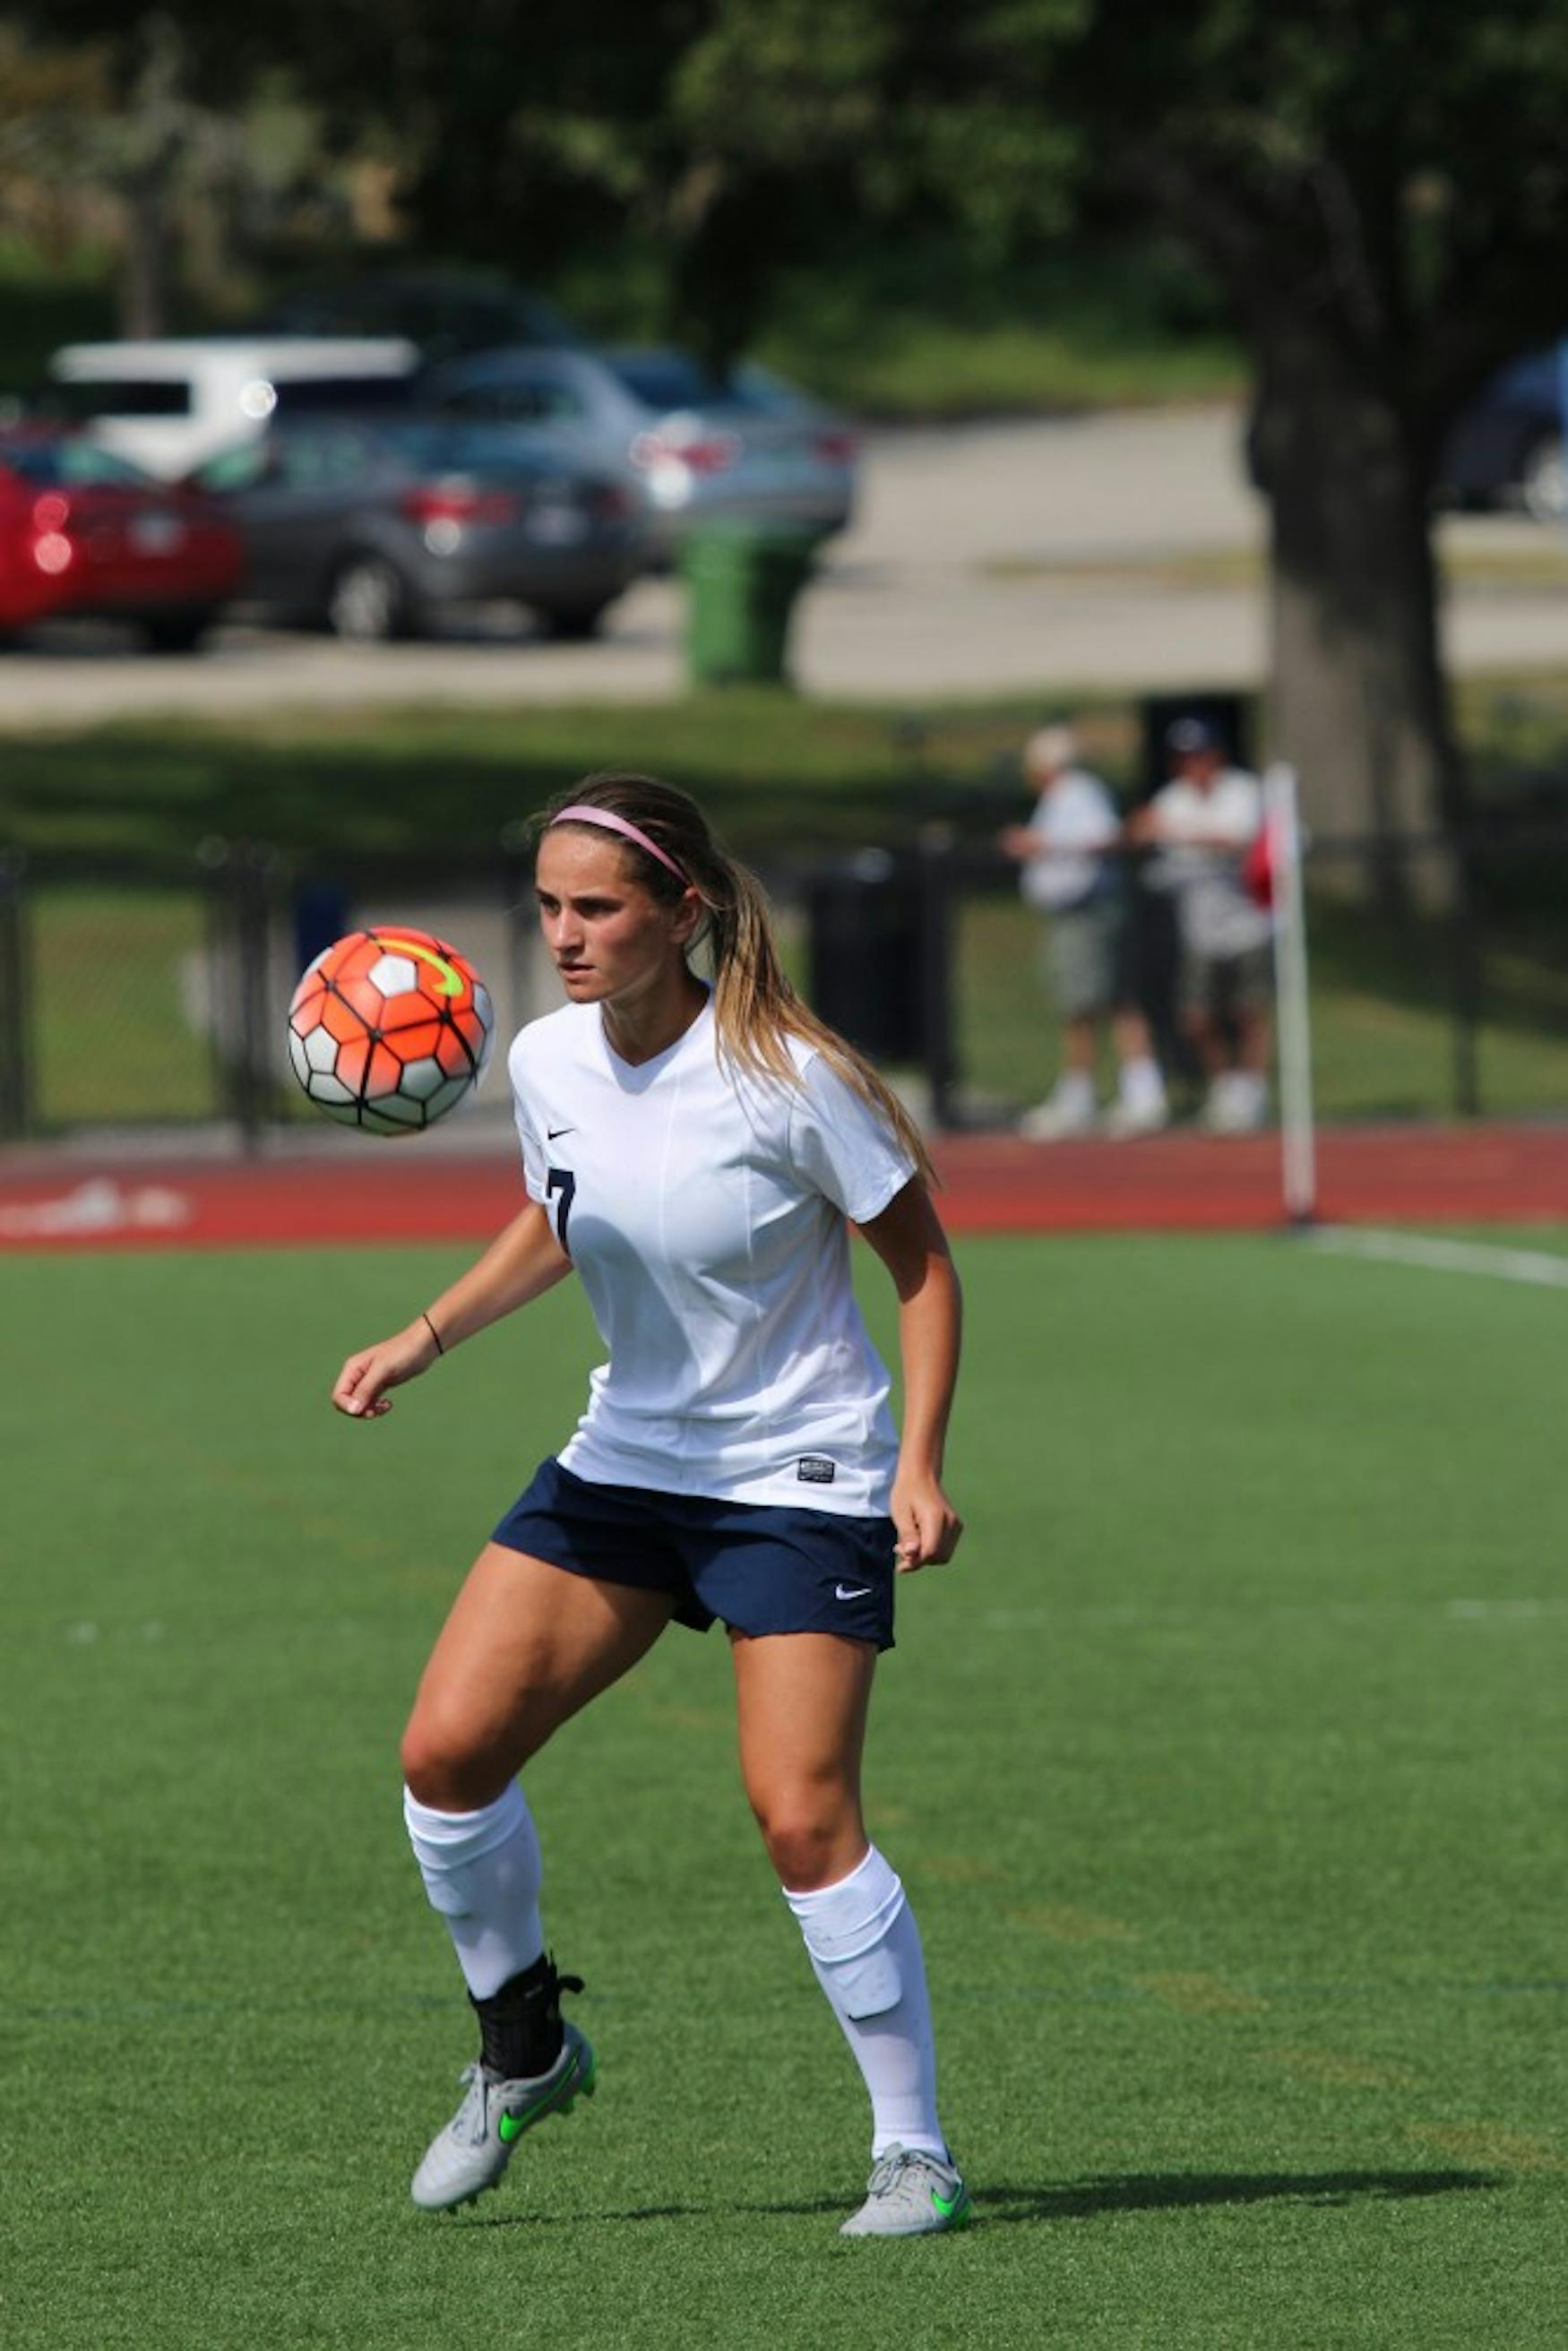 BALL CONTROL: Midfielder Holly Szafran ’16 holds the ball during a 1-0 victory over the University of Massachusetts Boston.